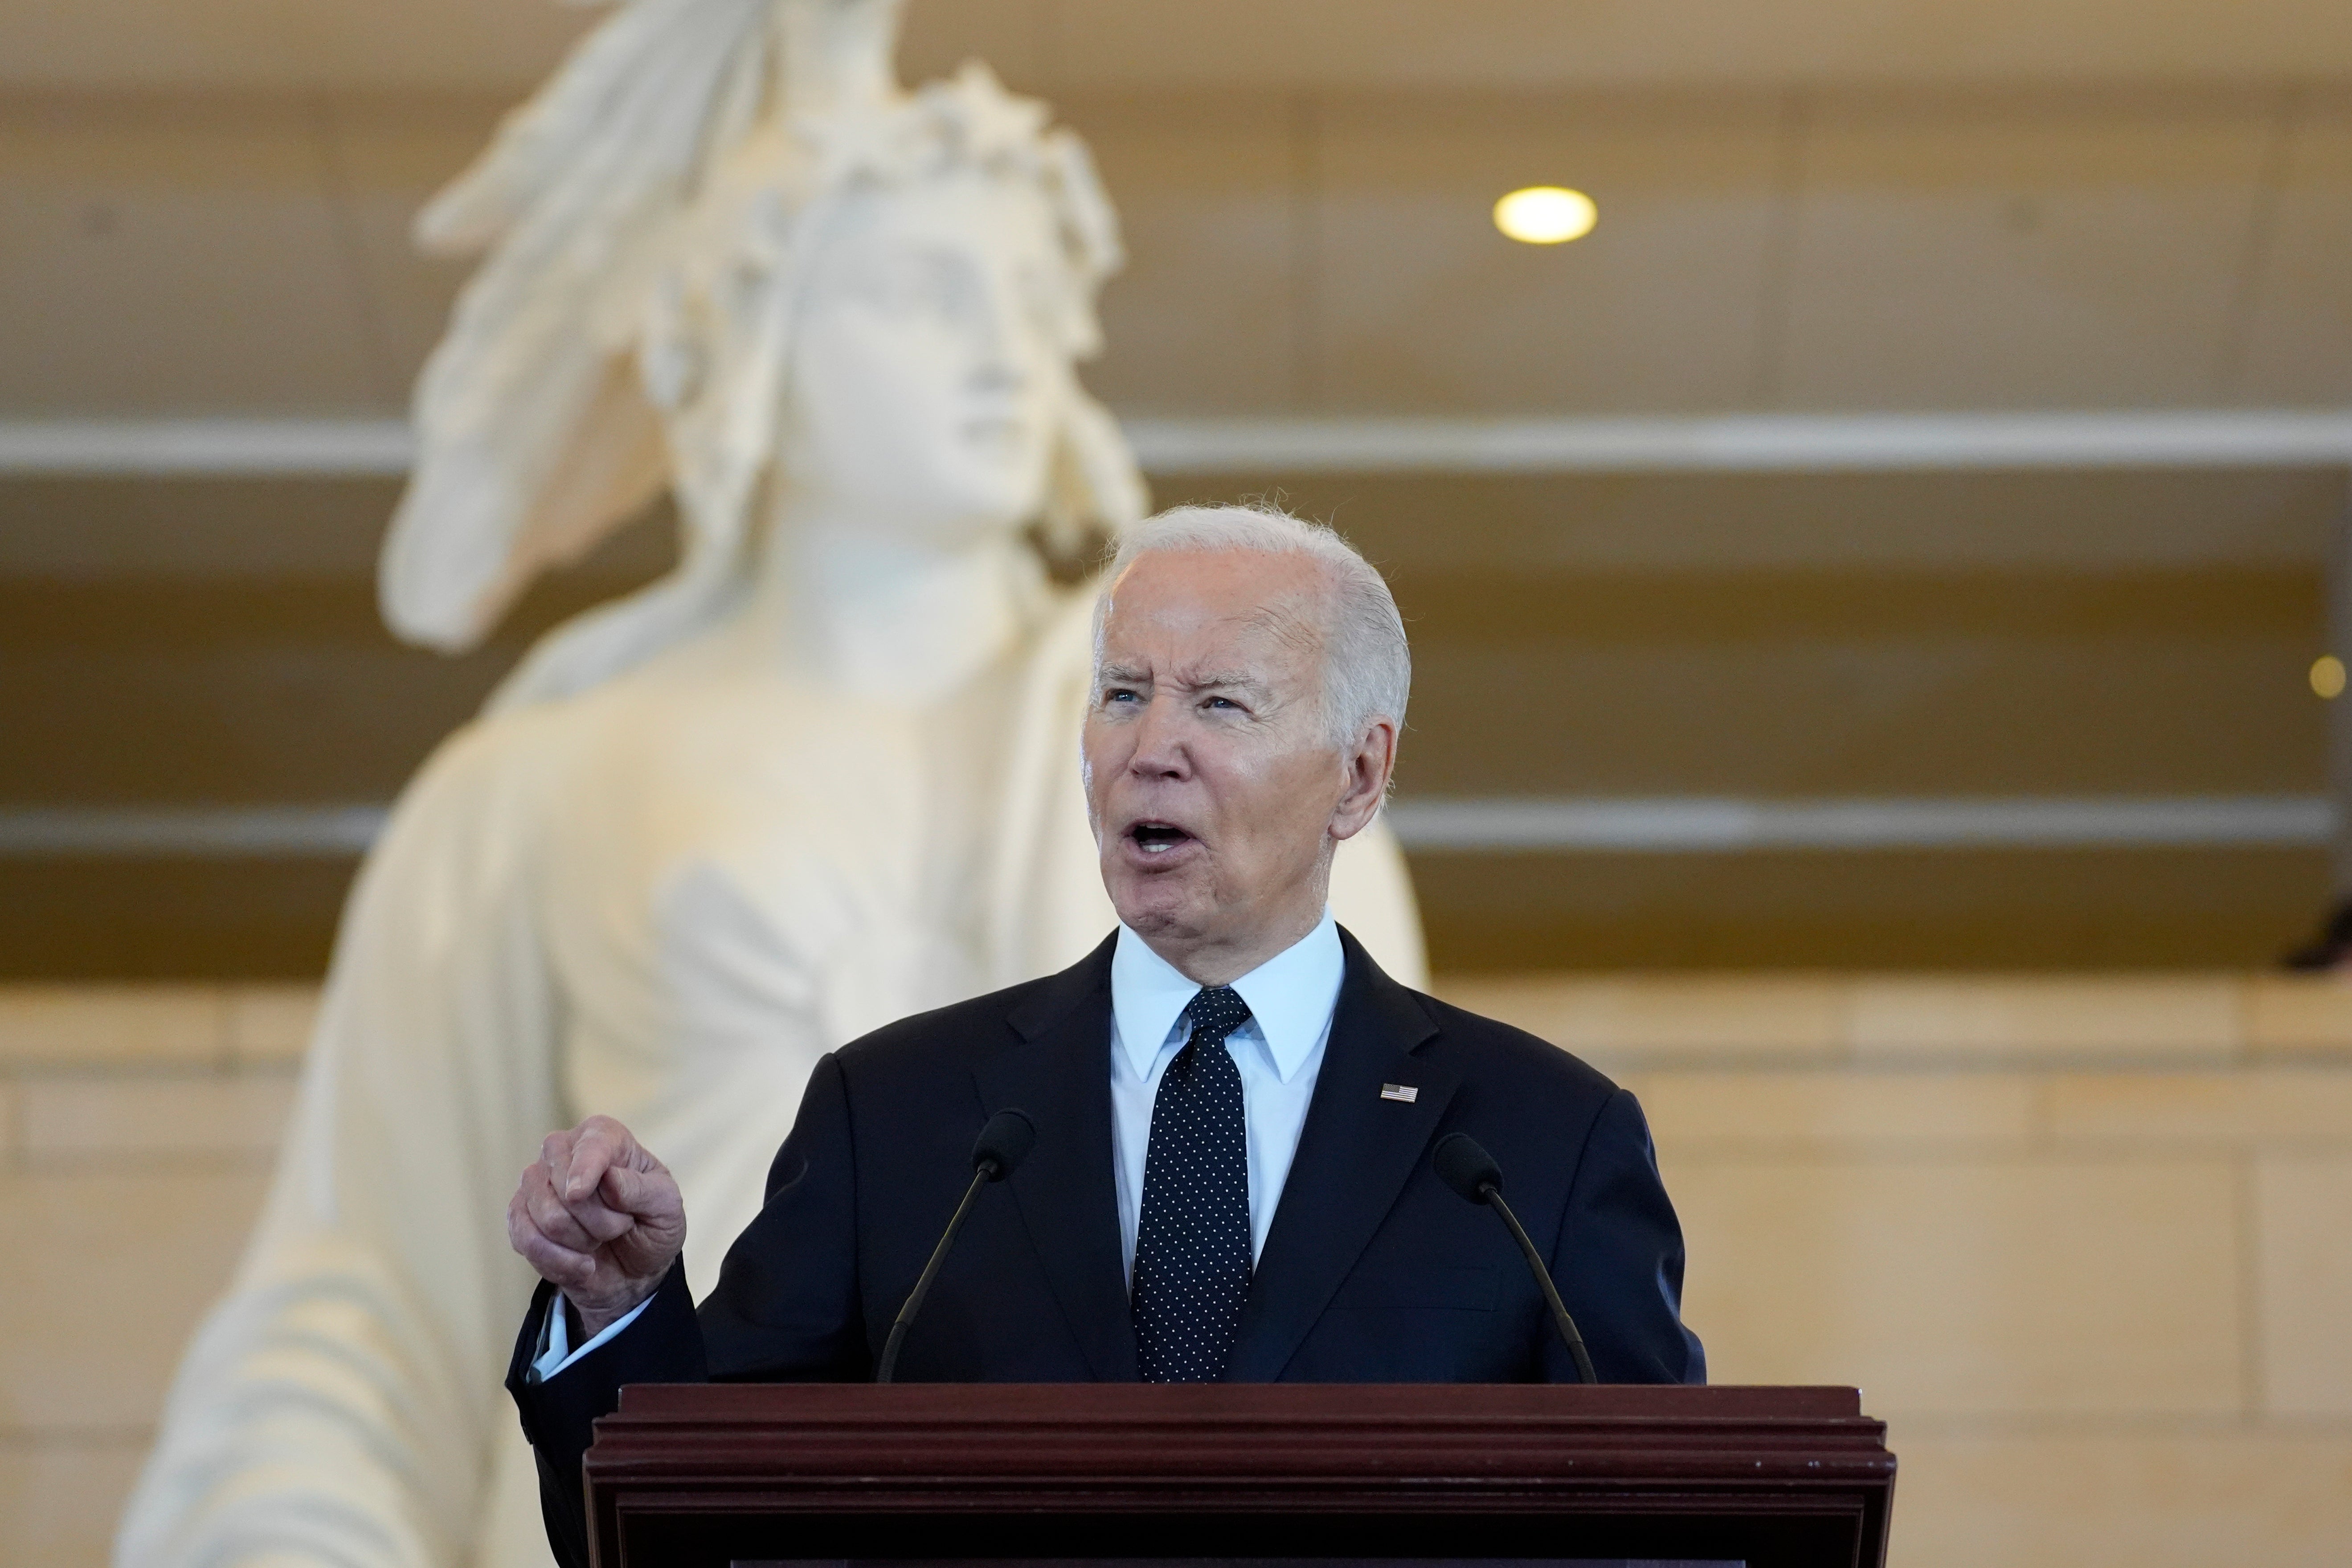 Joe Biden speaks at the Holocaust Memorial Museum's Annual Days of Remembrance ceremony